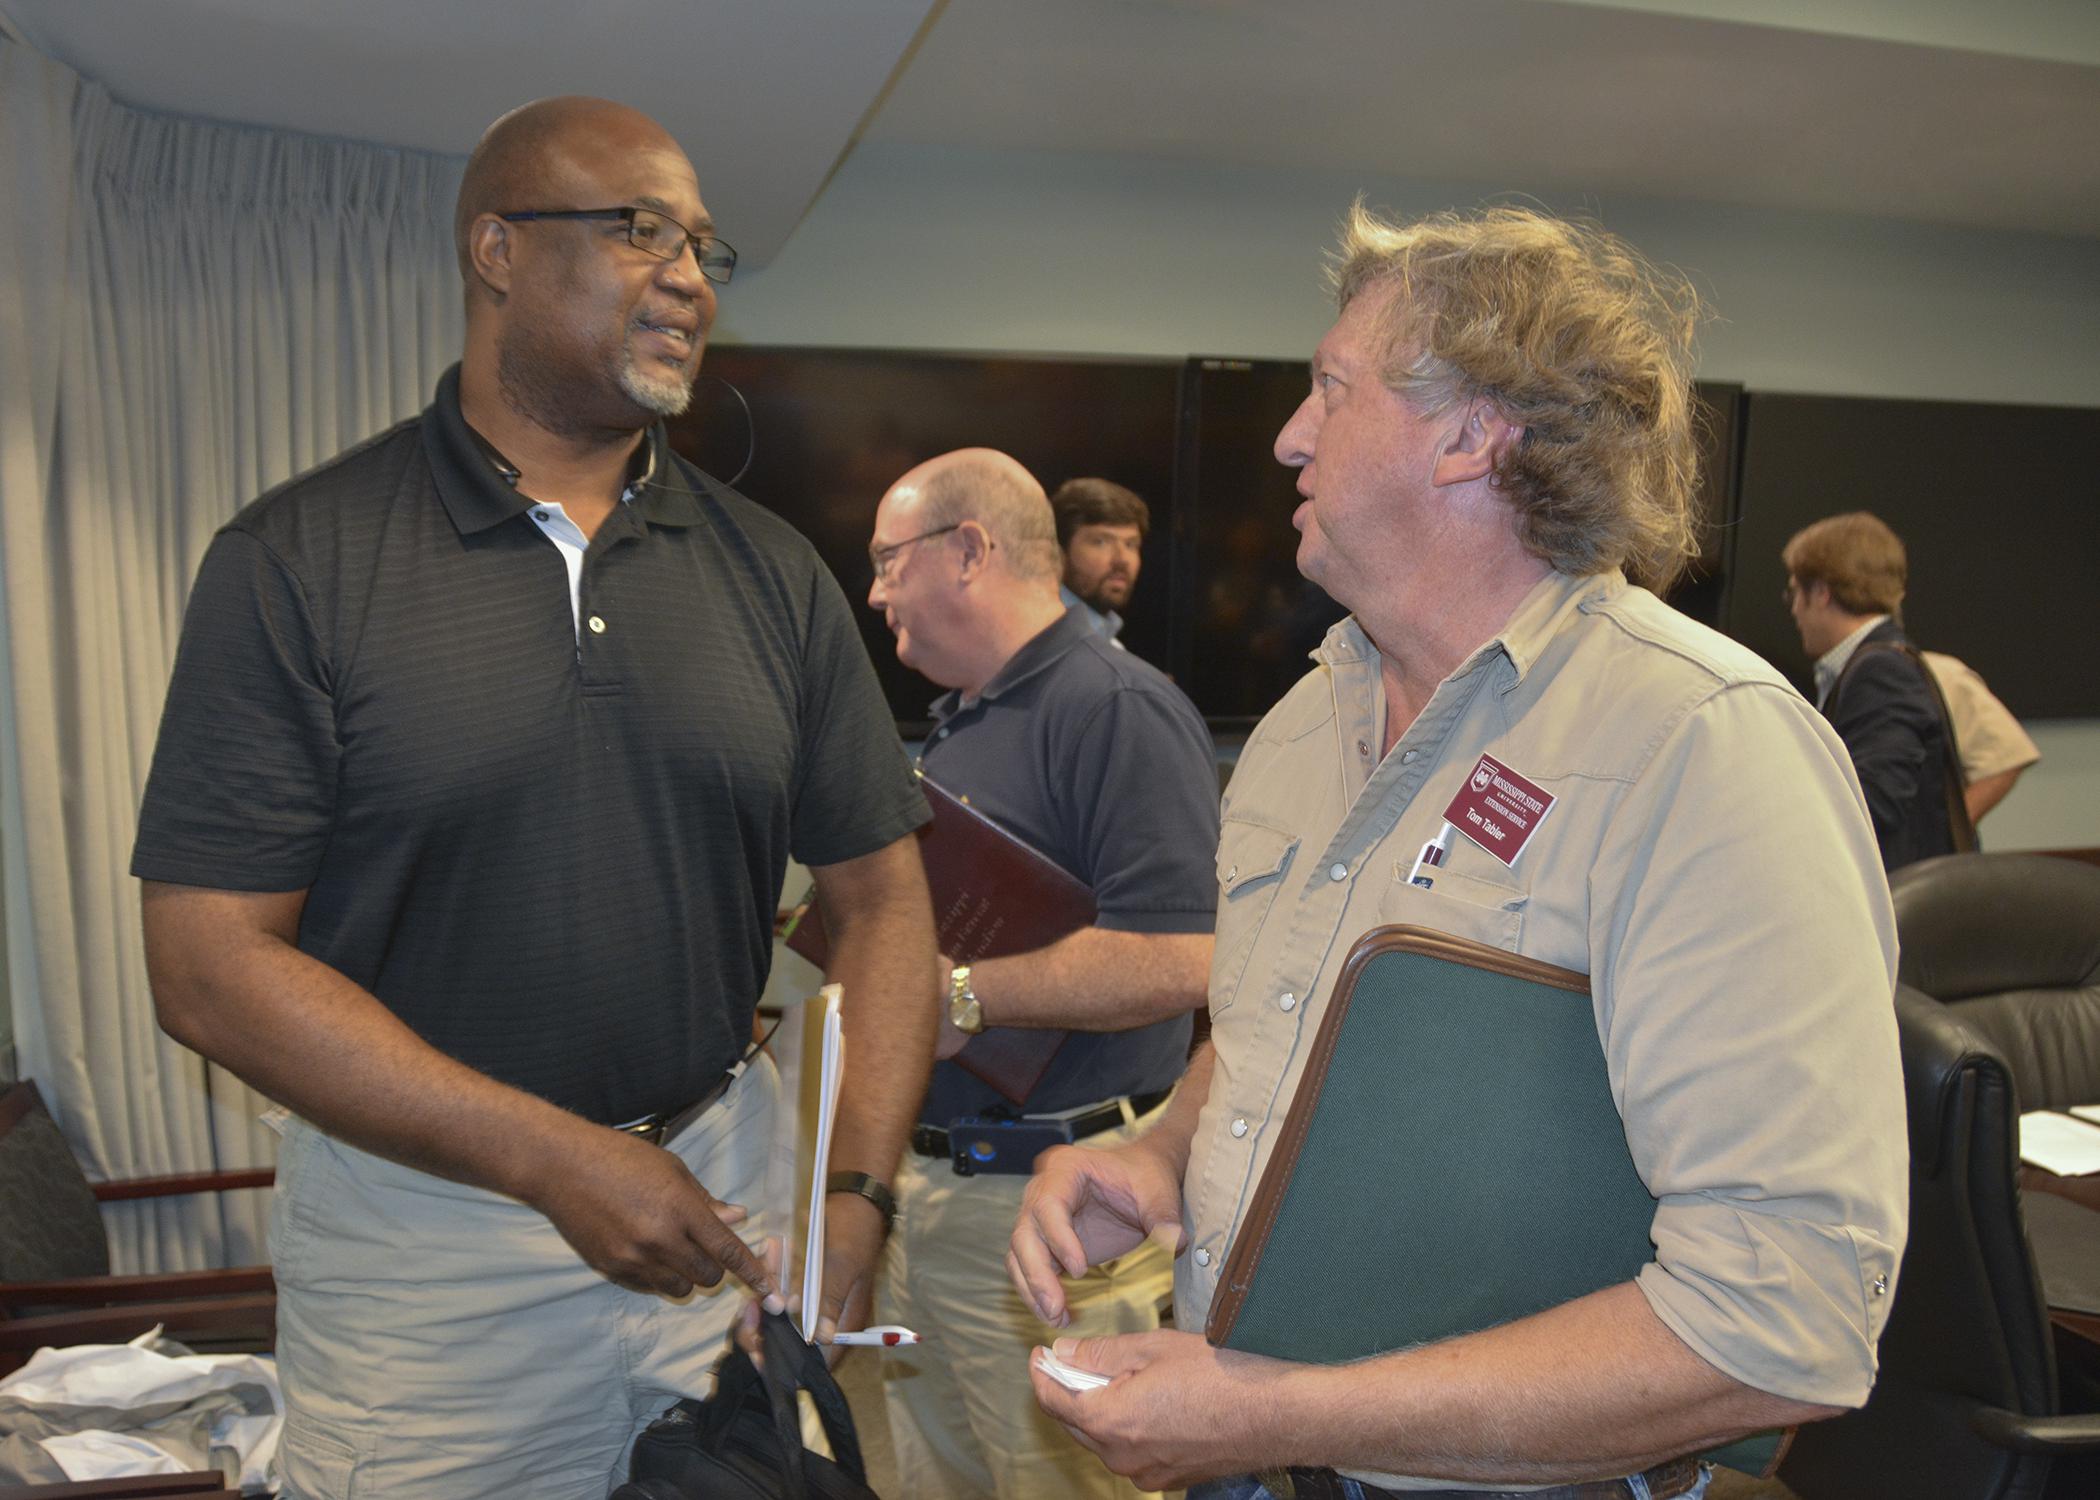 Greg Walker, director of human resources for Mar-Jac Poultry, left, talks to Tom Tabler, a poultry specialist with the Mississippi State University Extension Service, during a bird flu information meeting at the Mississippi Emergency Management Agency office in Pearl on Sept. 11, 2015. (Photo by MSU Ag Communications/Linda Breazeale)